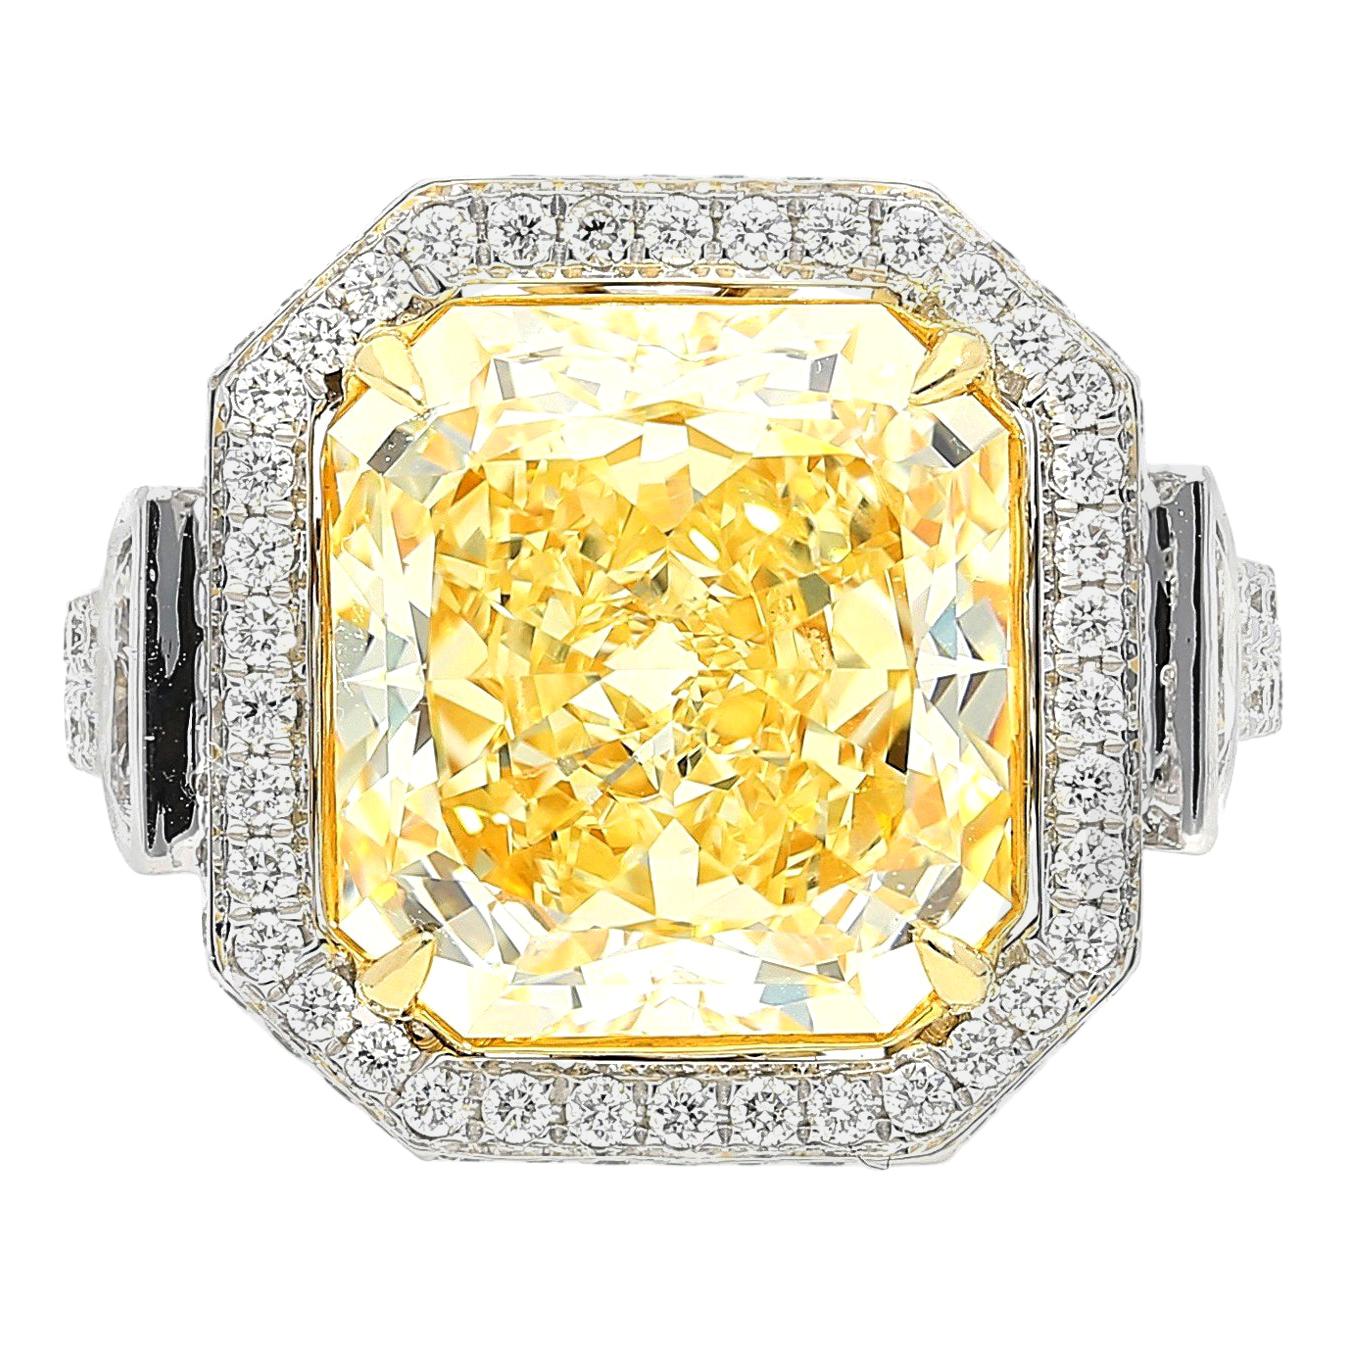 GIA Certified 7.52 Carat Radiant-Cut VVS2 Clarity Fancy Yellow Diamond Ring For Sale